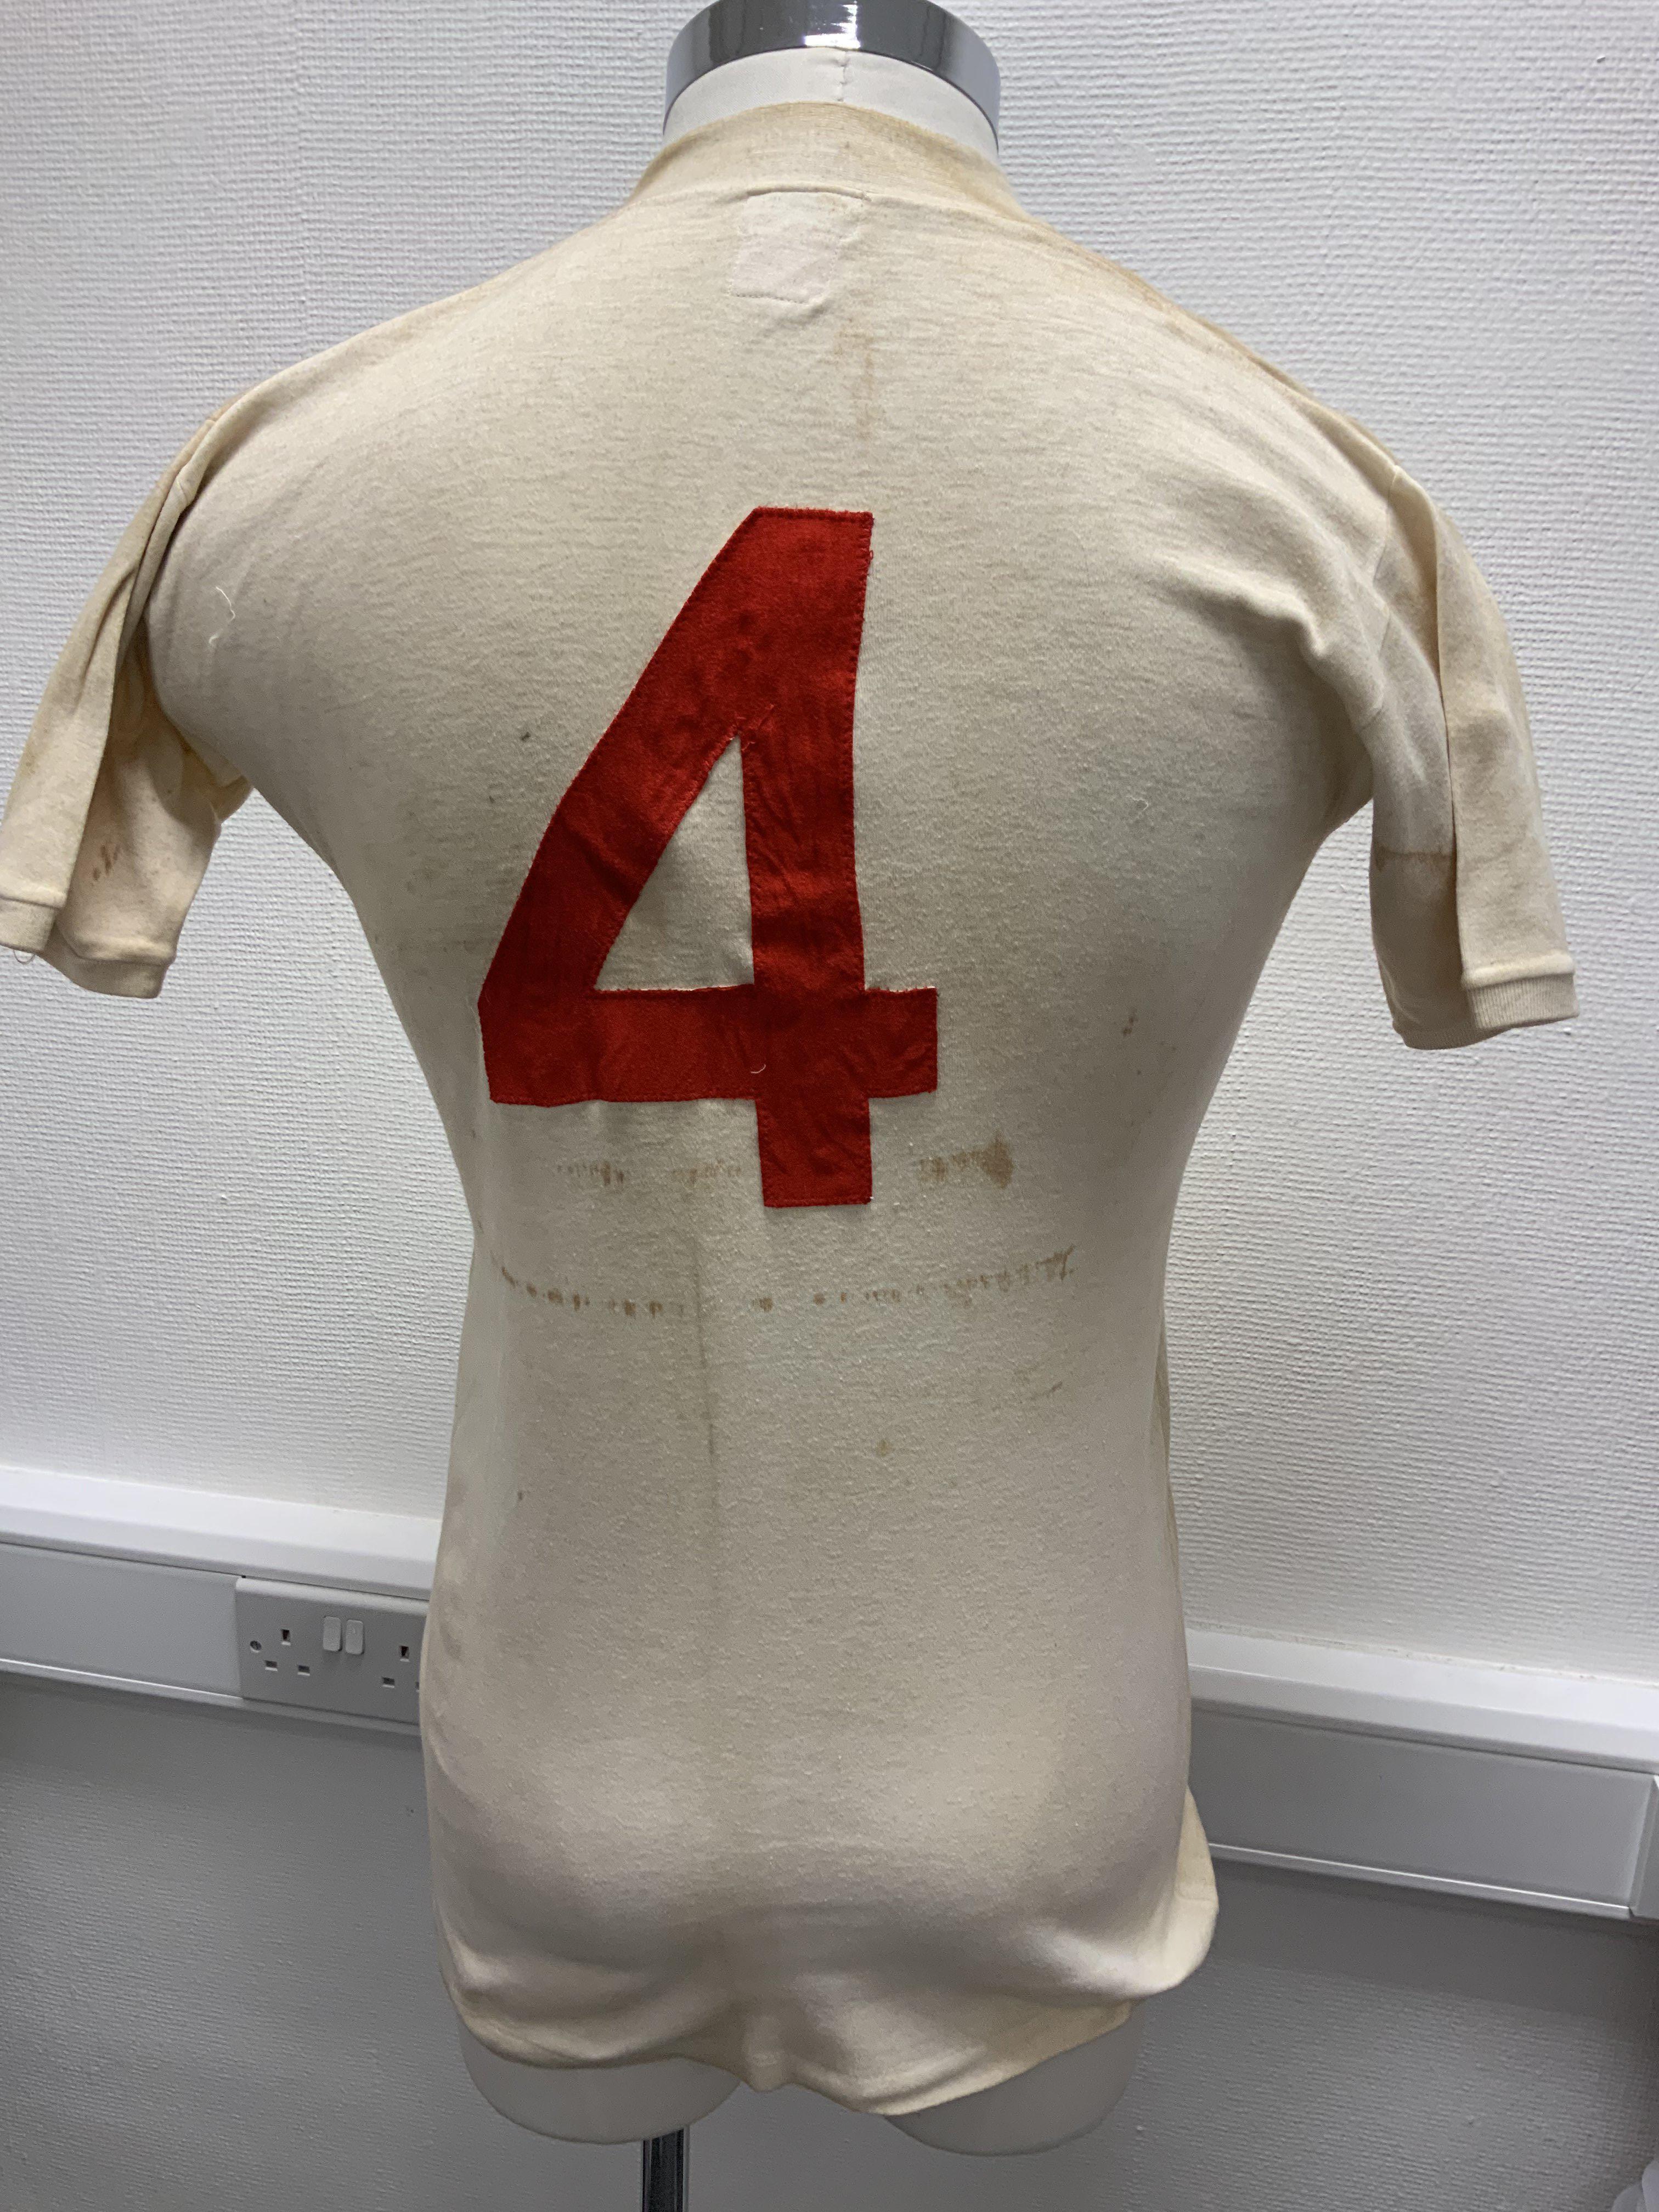 1950s Maurice Setters England Youth Match Worn Football Shirt: White short sleeve with 3 Lions - Image 2 of 3